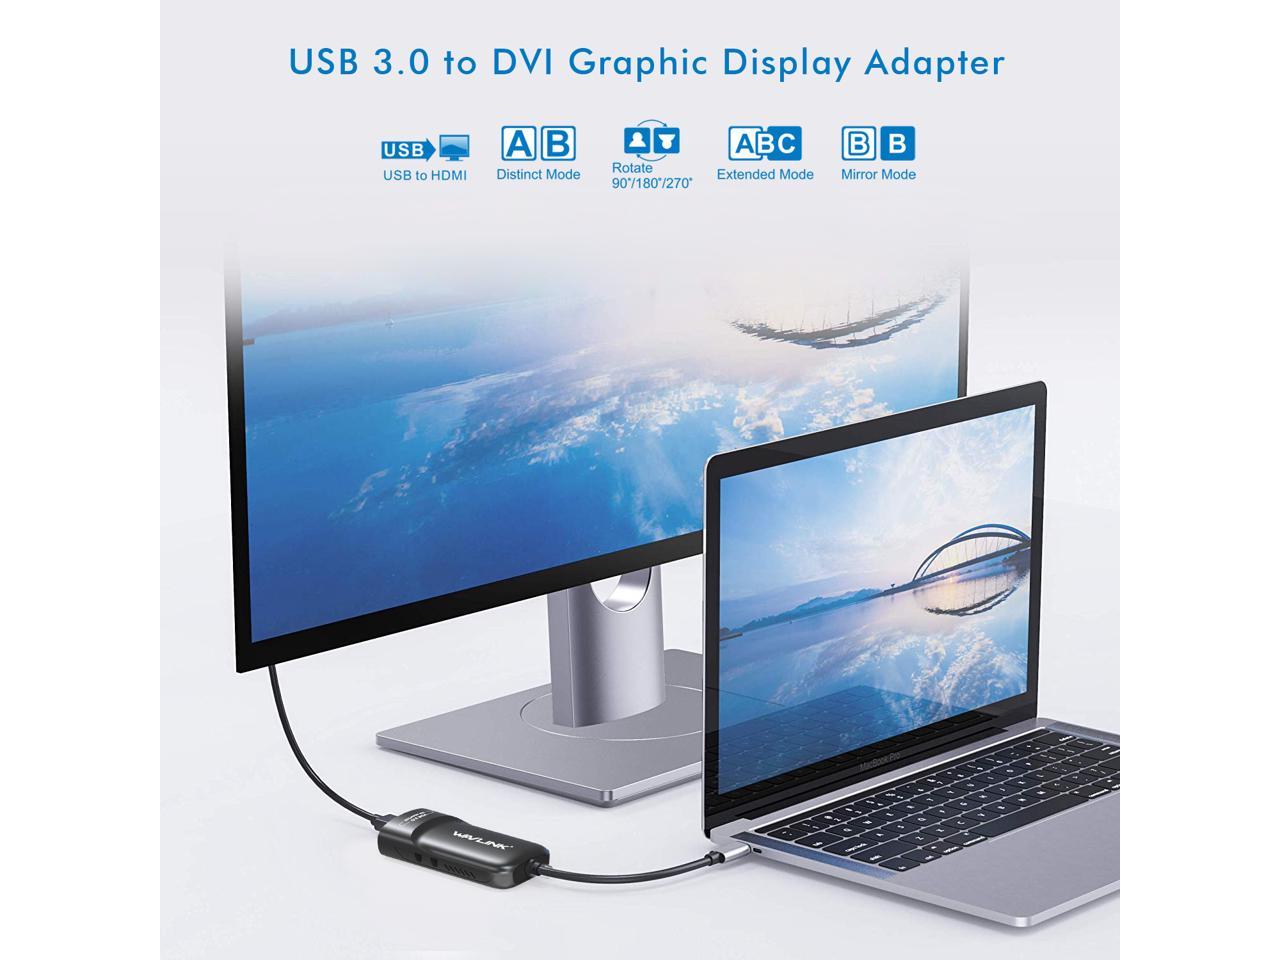 XP Wavlink USB 3.0 to DVI Video Graphics Adapter with Audio Port for Multiple Monitors up to 2048x1152 Supports Windows 10 7 8.1 Mac 